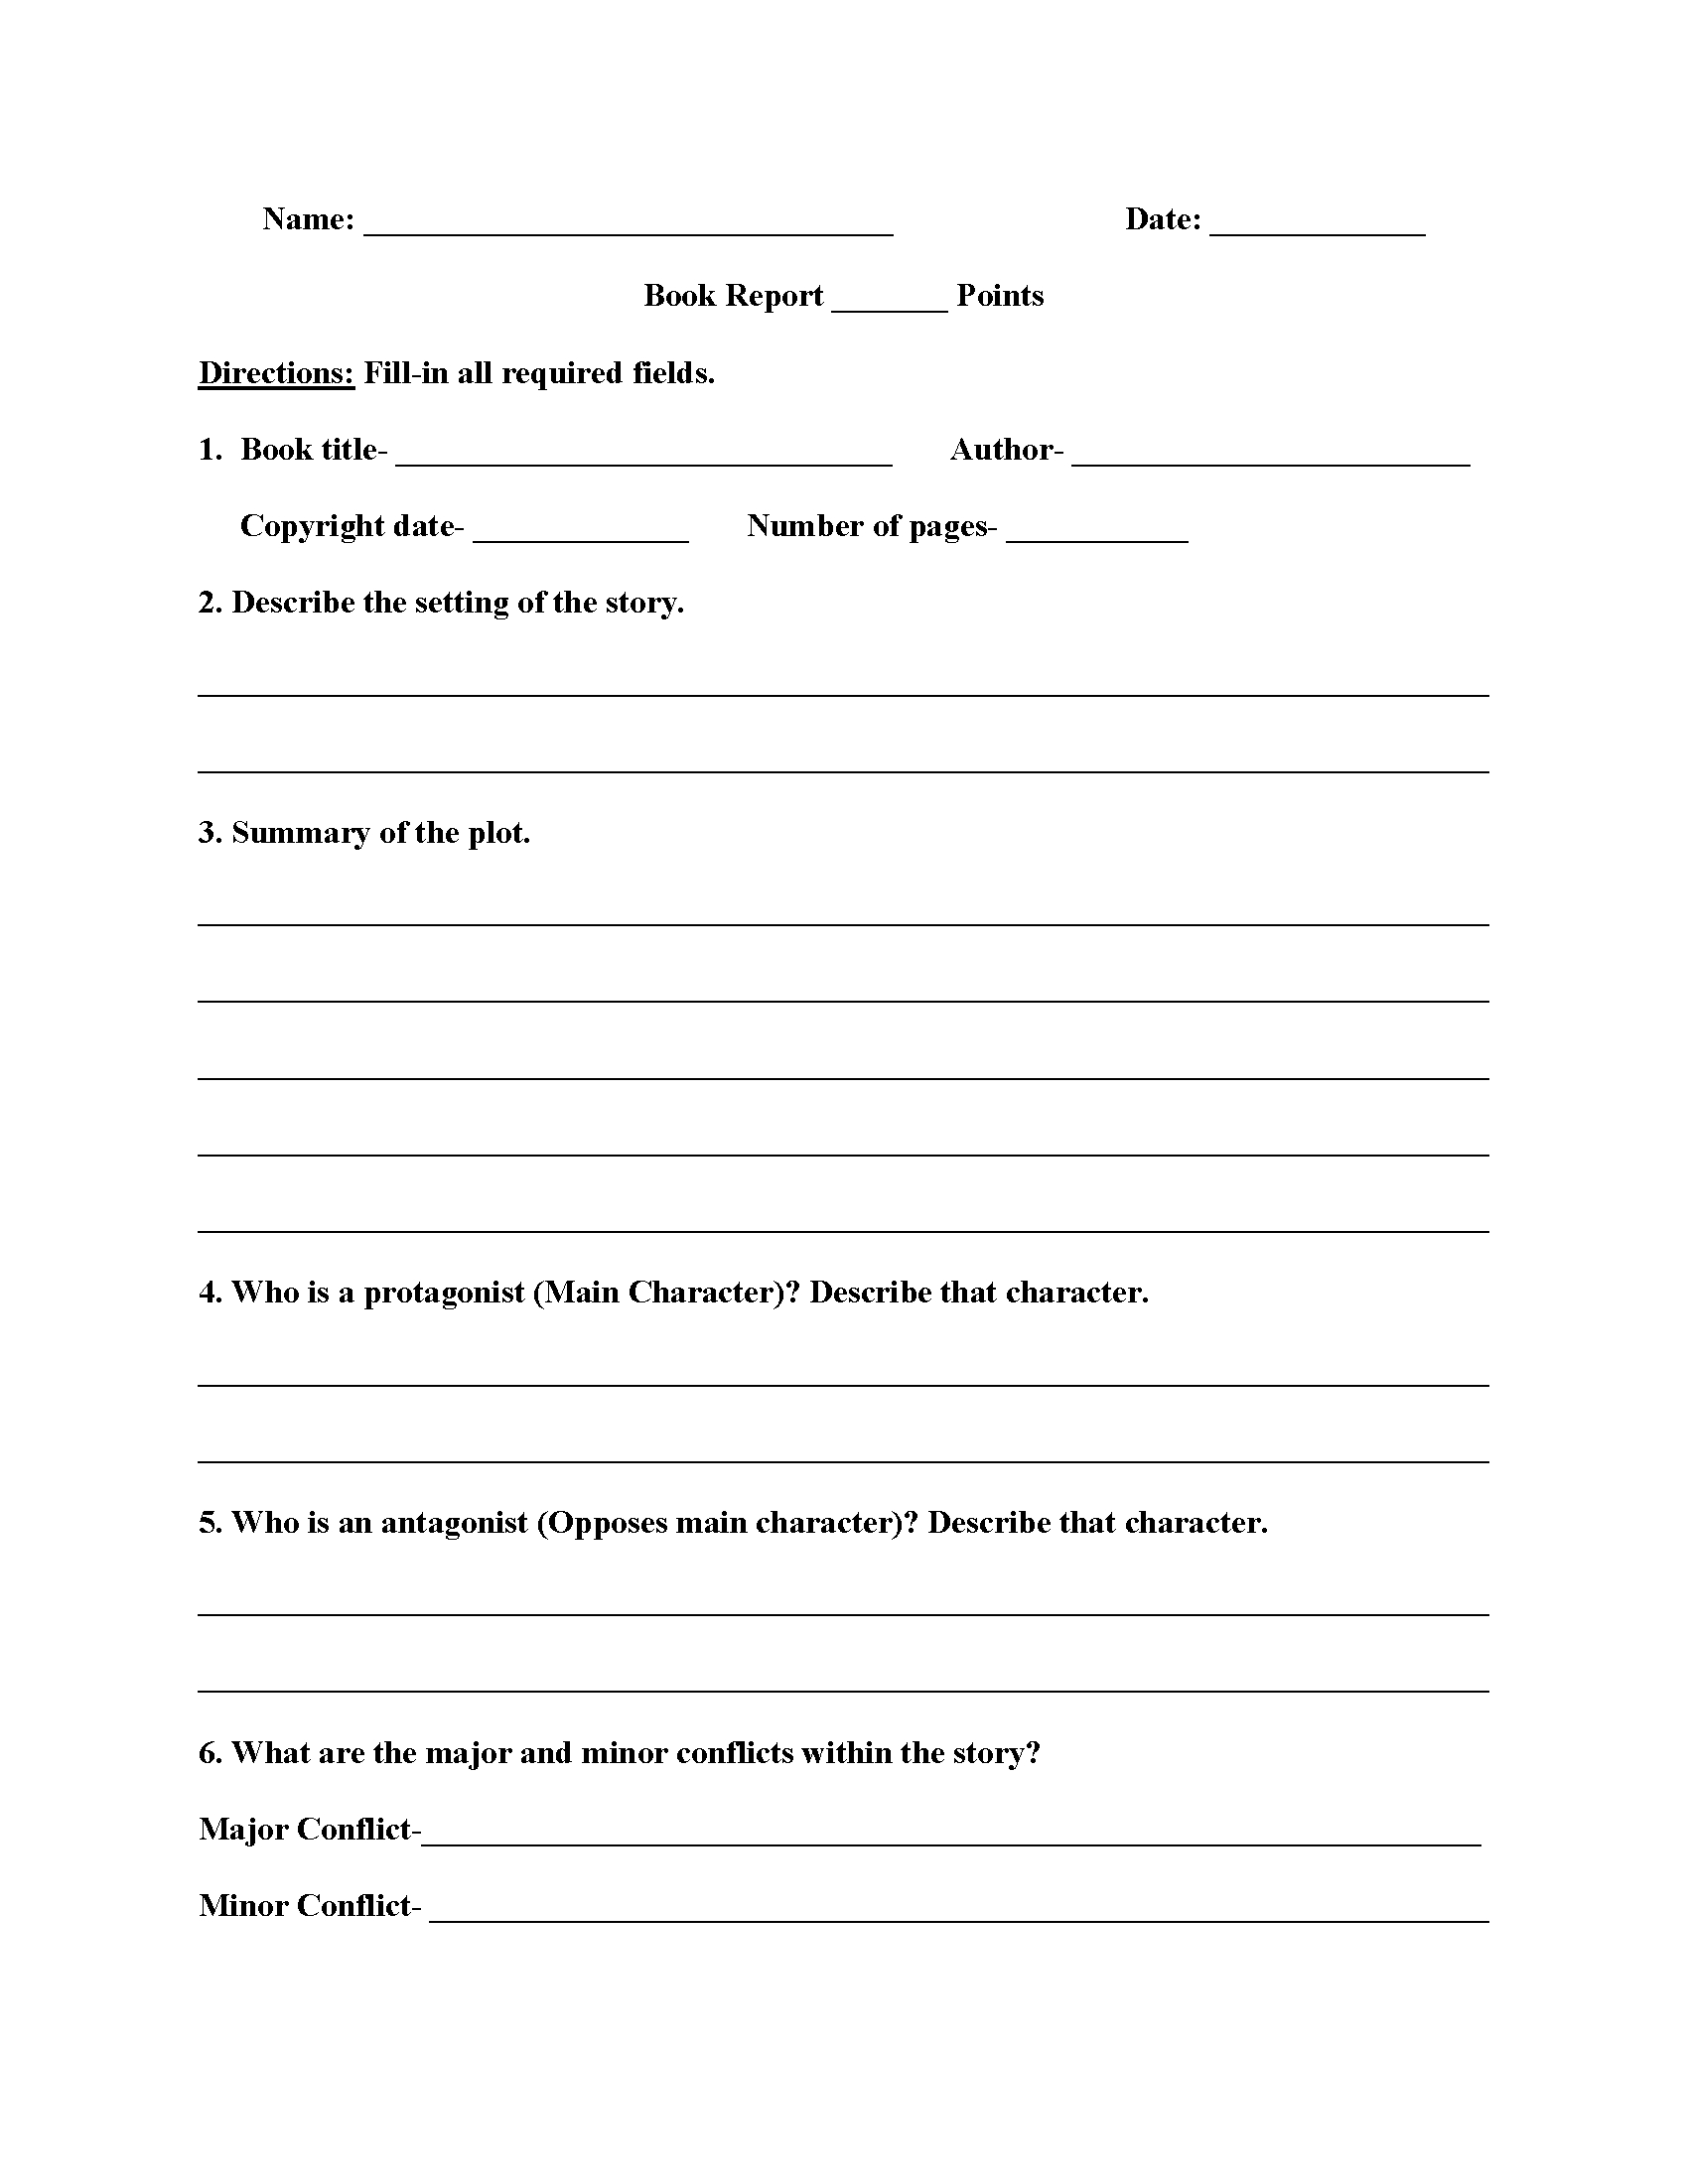 Englishlinx | Book Report Worksheets In Book Report Template 3Rd Grade